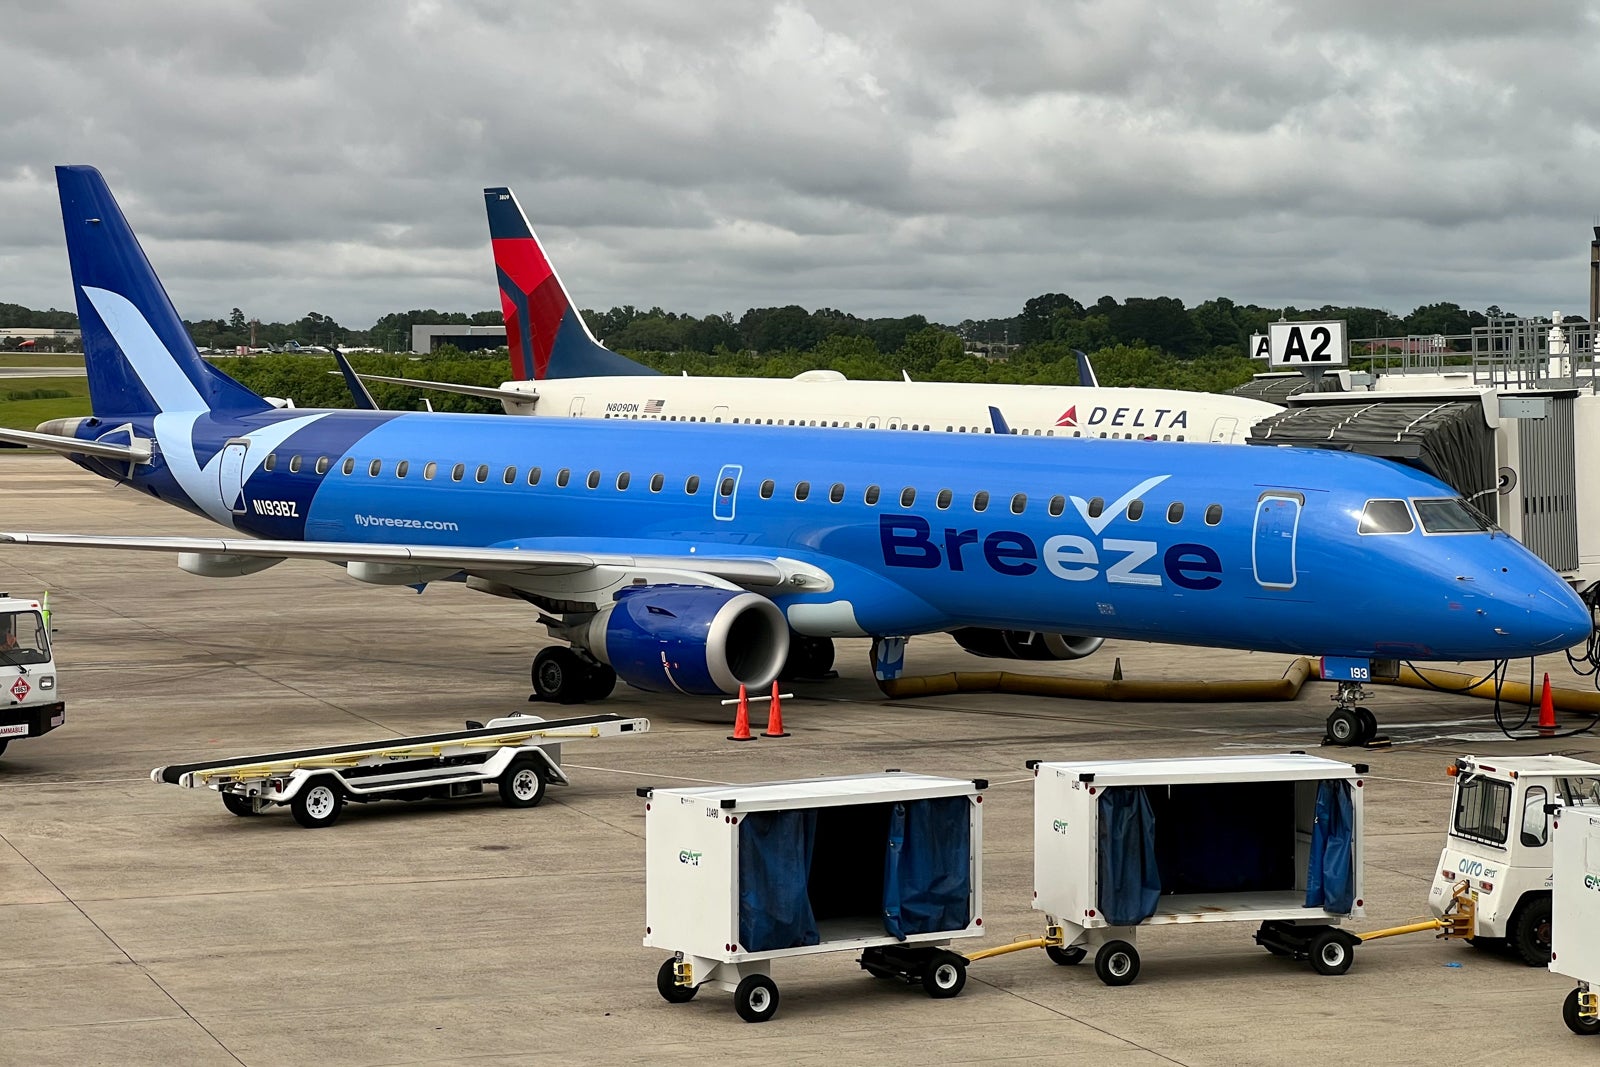 Breeze deal: Fly to multiple US cities for as little